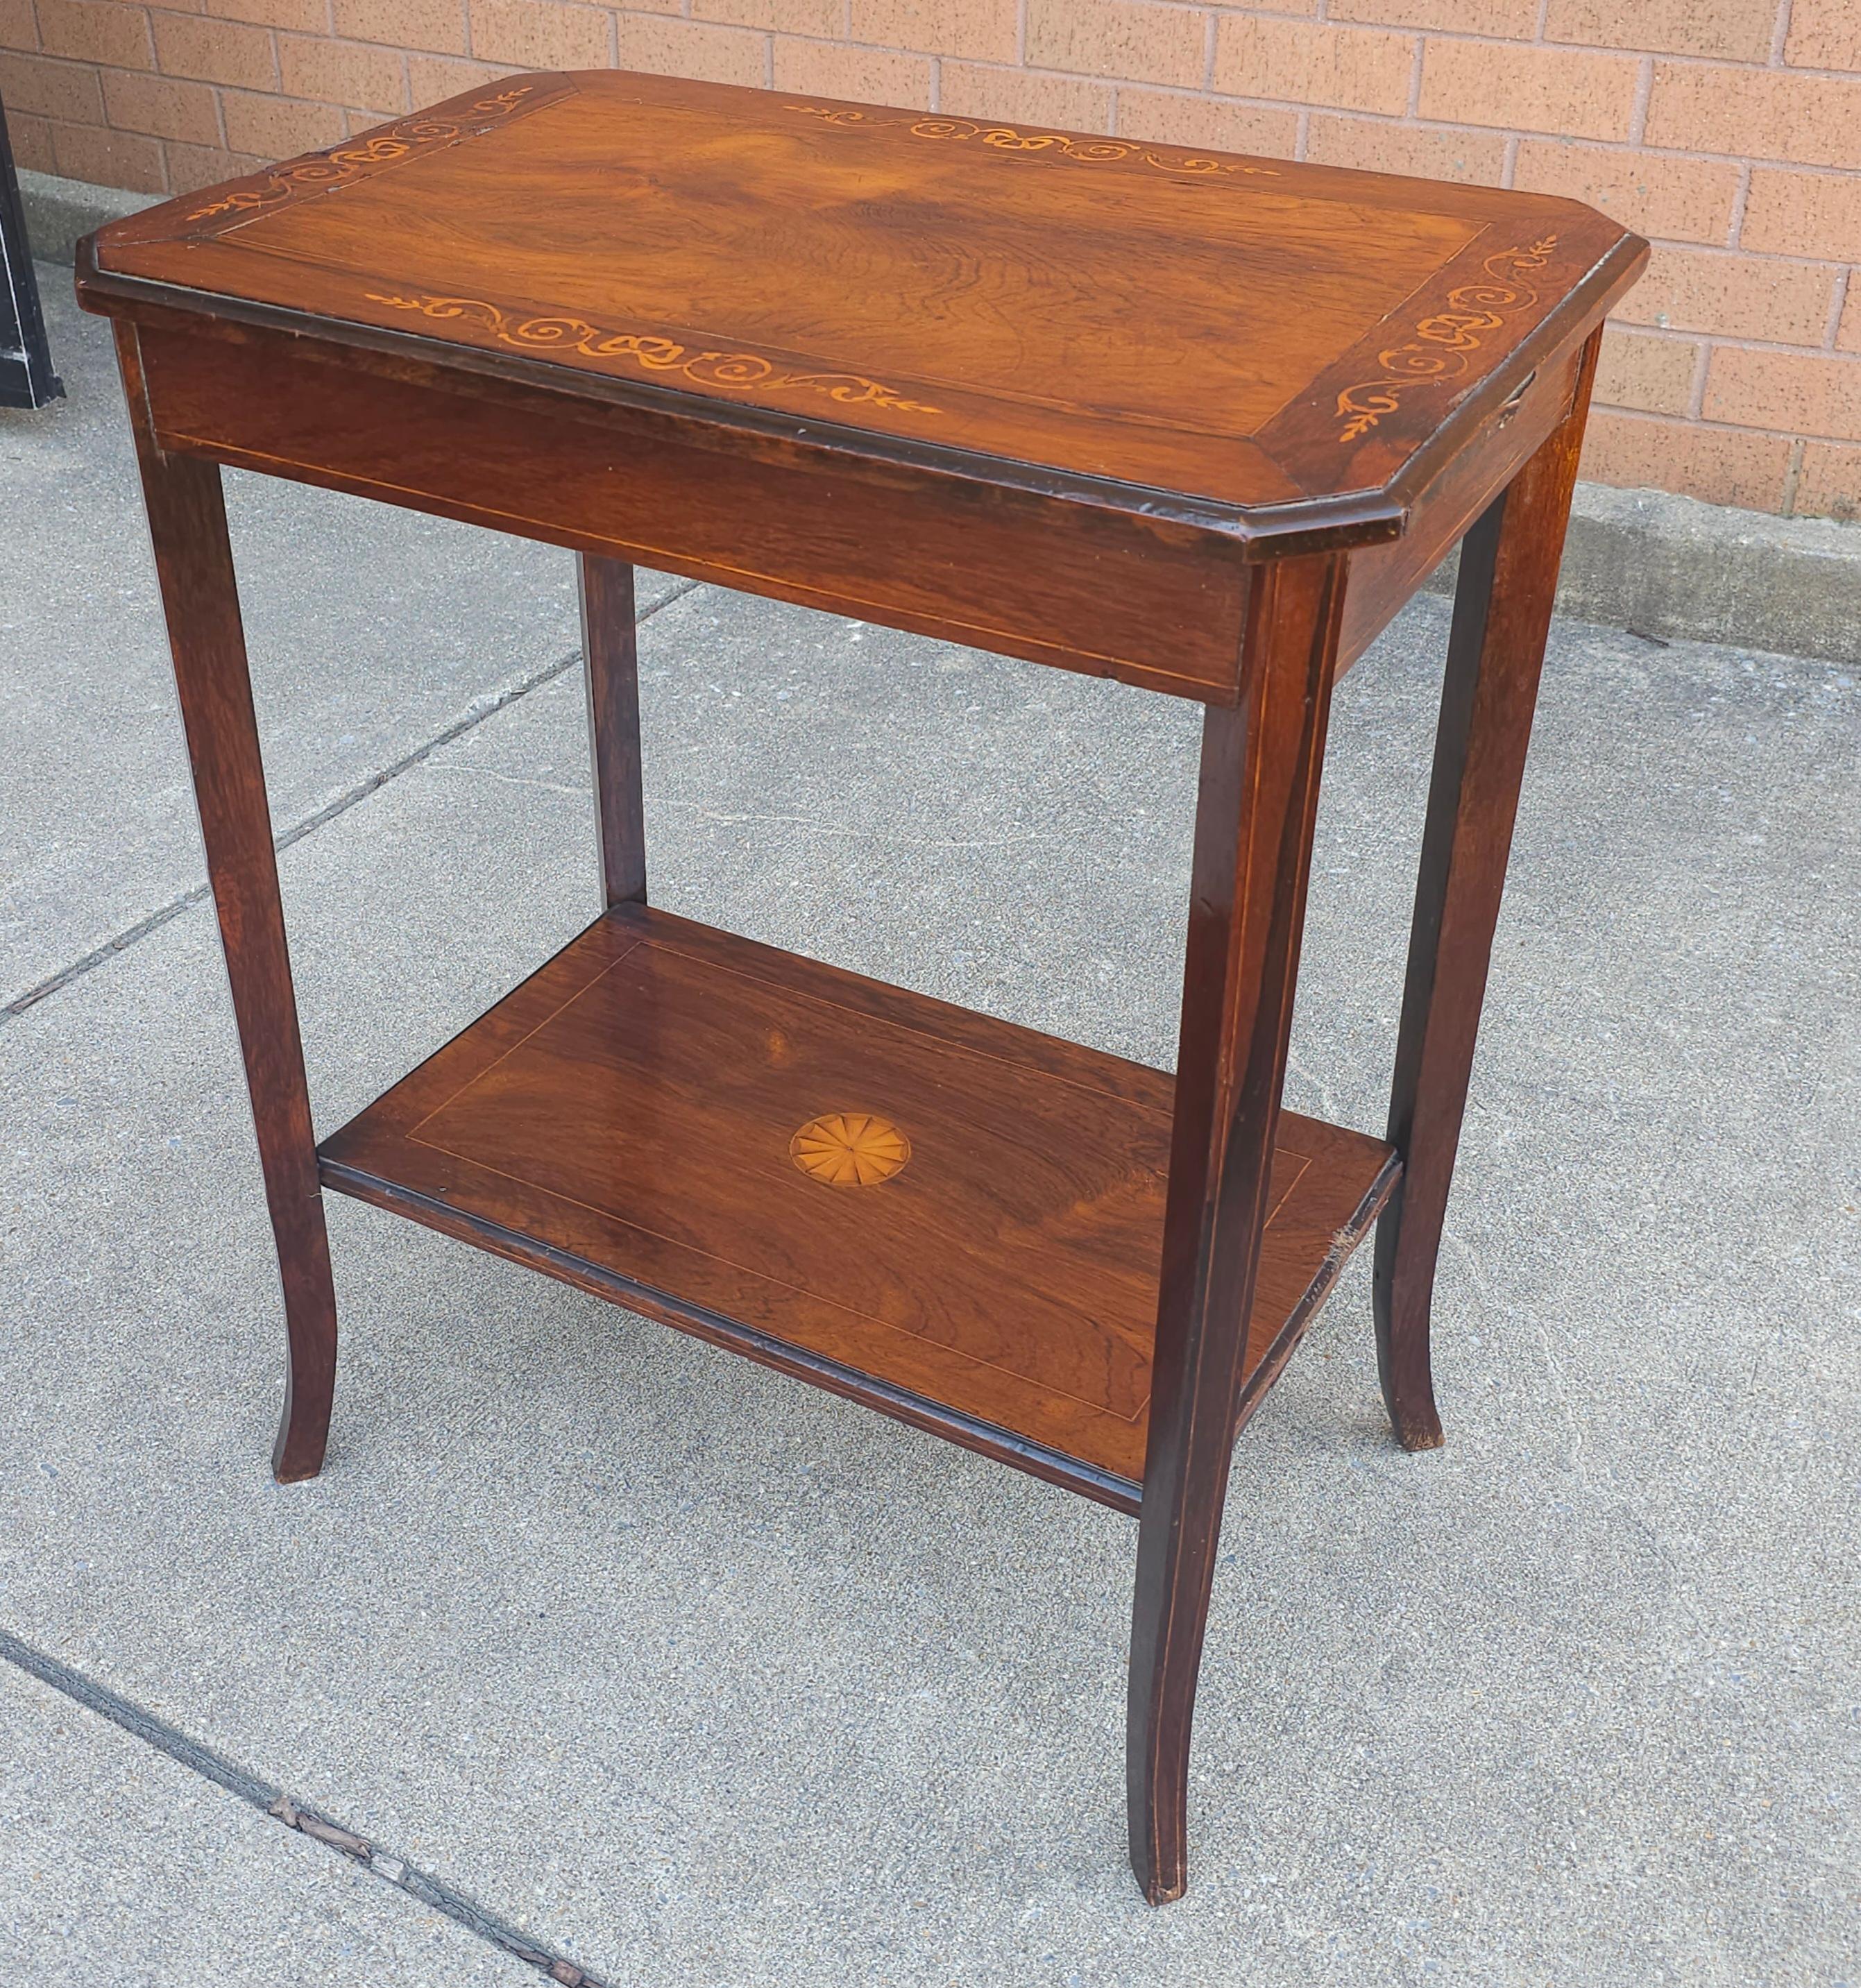 Early 20th C. Edwardian Rosewood Marquetry Inlaid  Table d'appoint Bon état - En vente à Germantown, MD